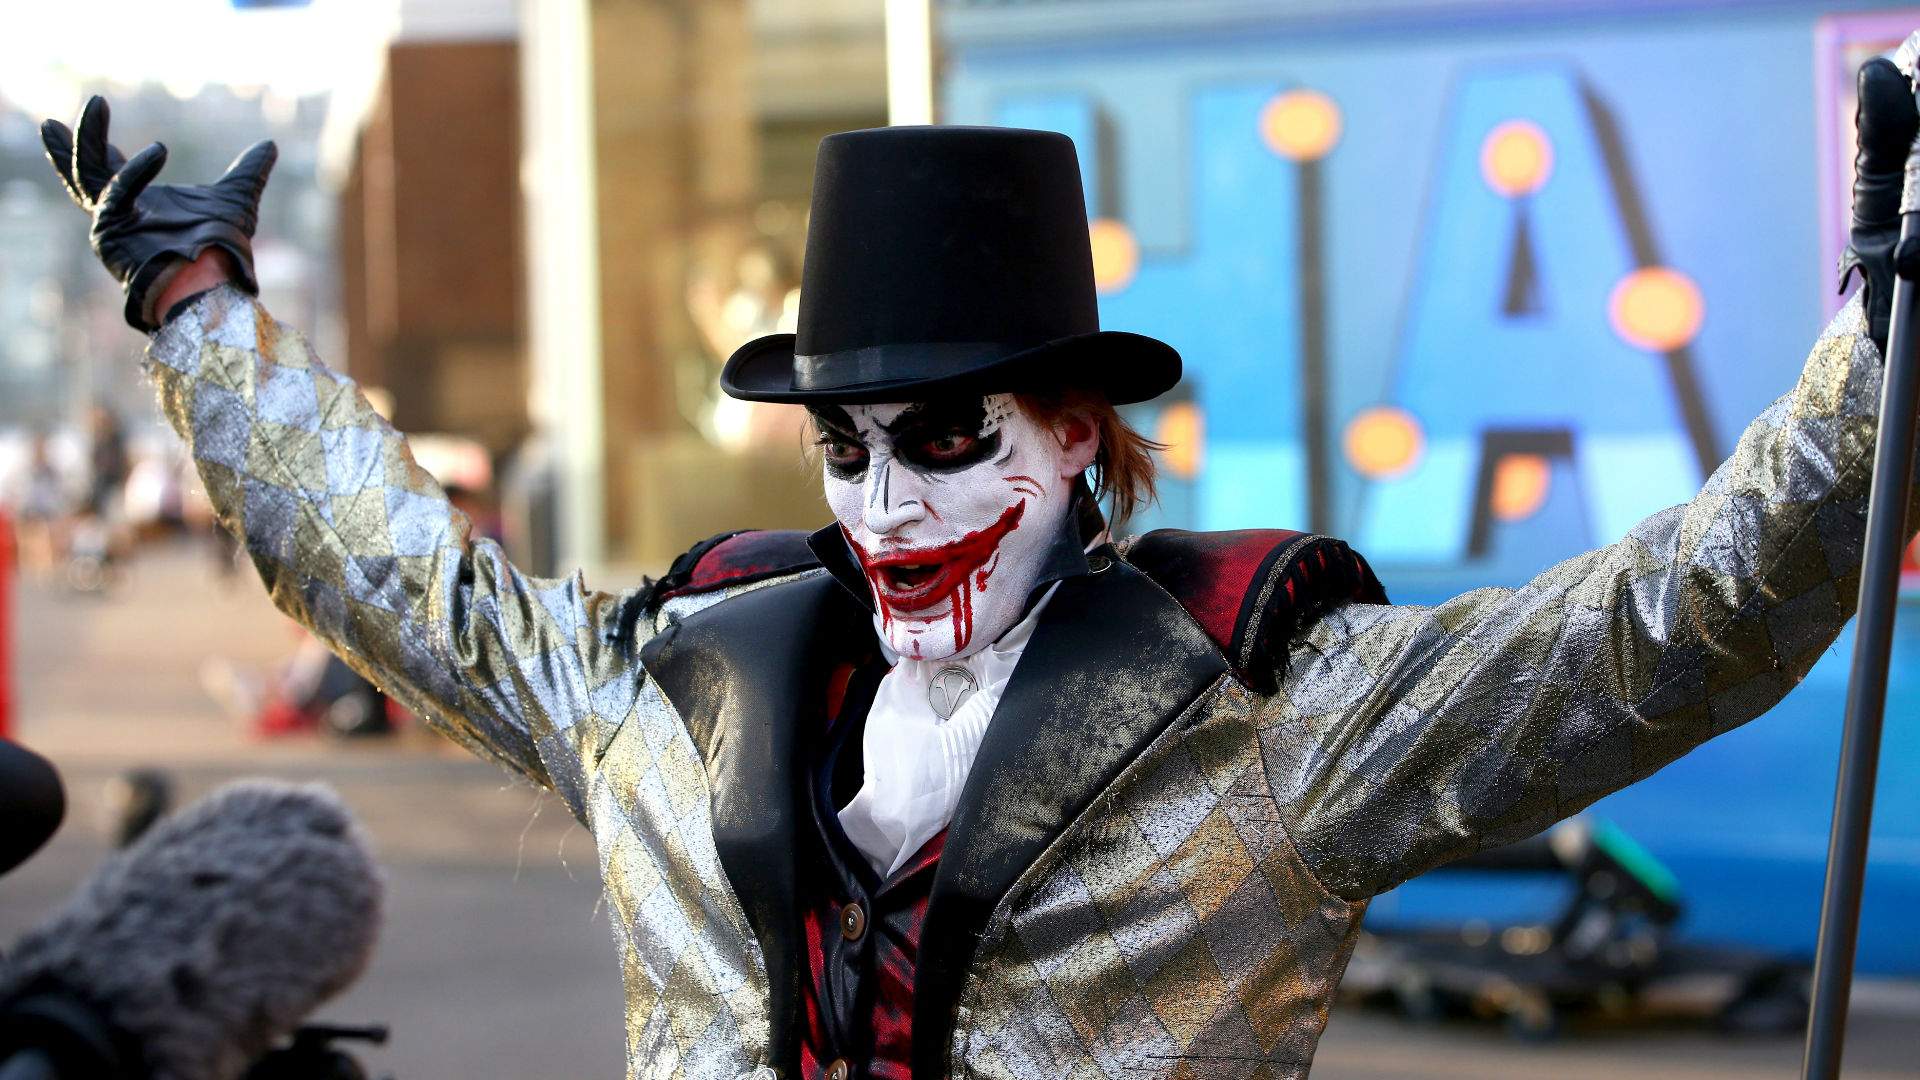 We're Giving Away Passes to This Halloween Festival on the Lower North Shore